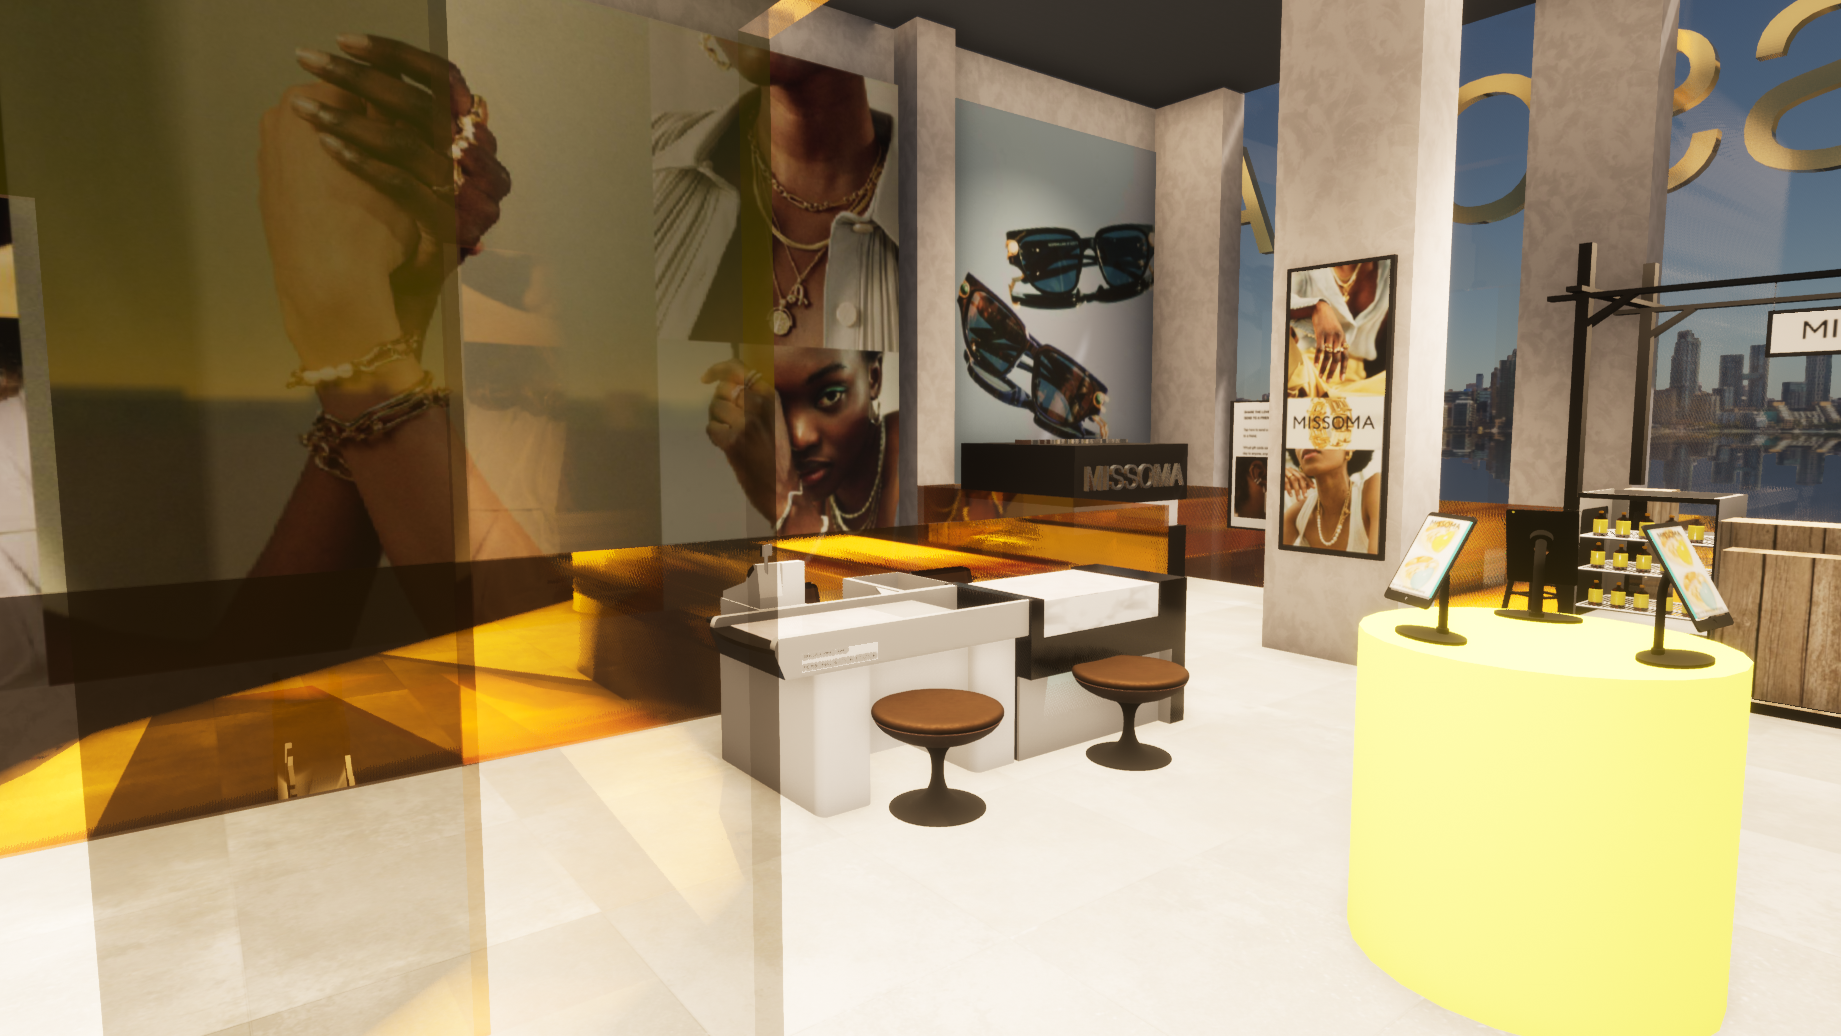 Virtual jewellery store in brown ad gold tones